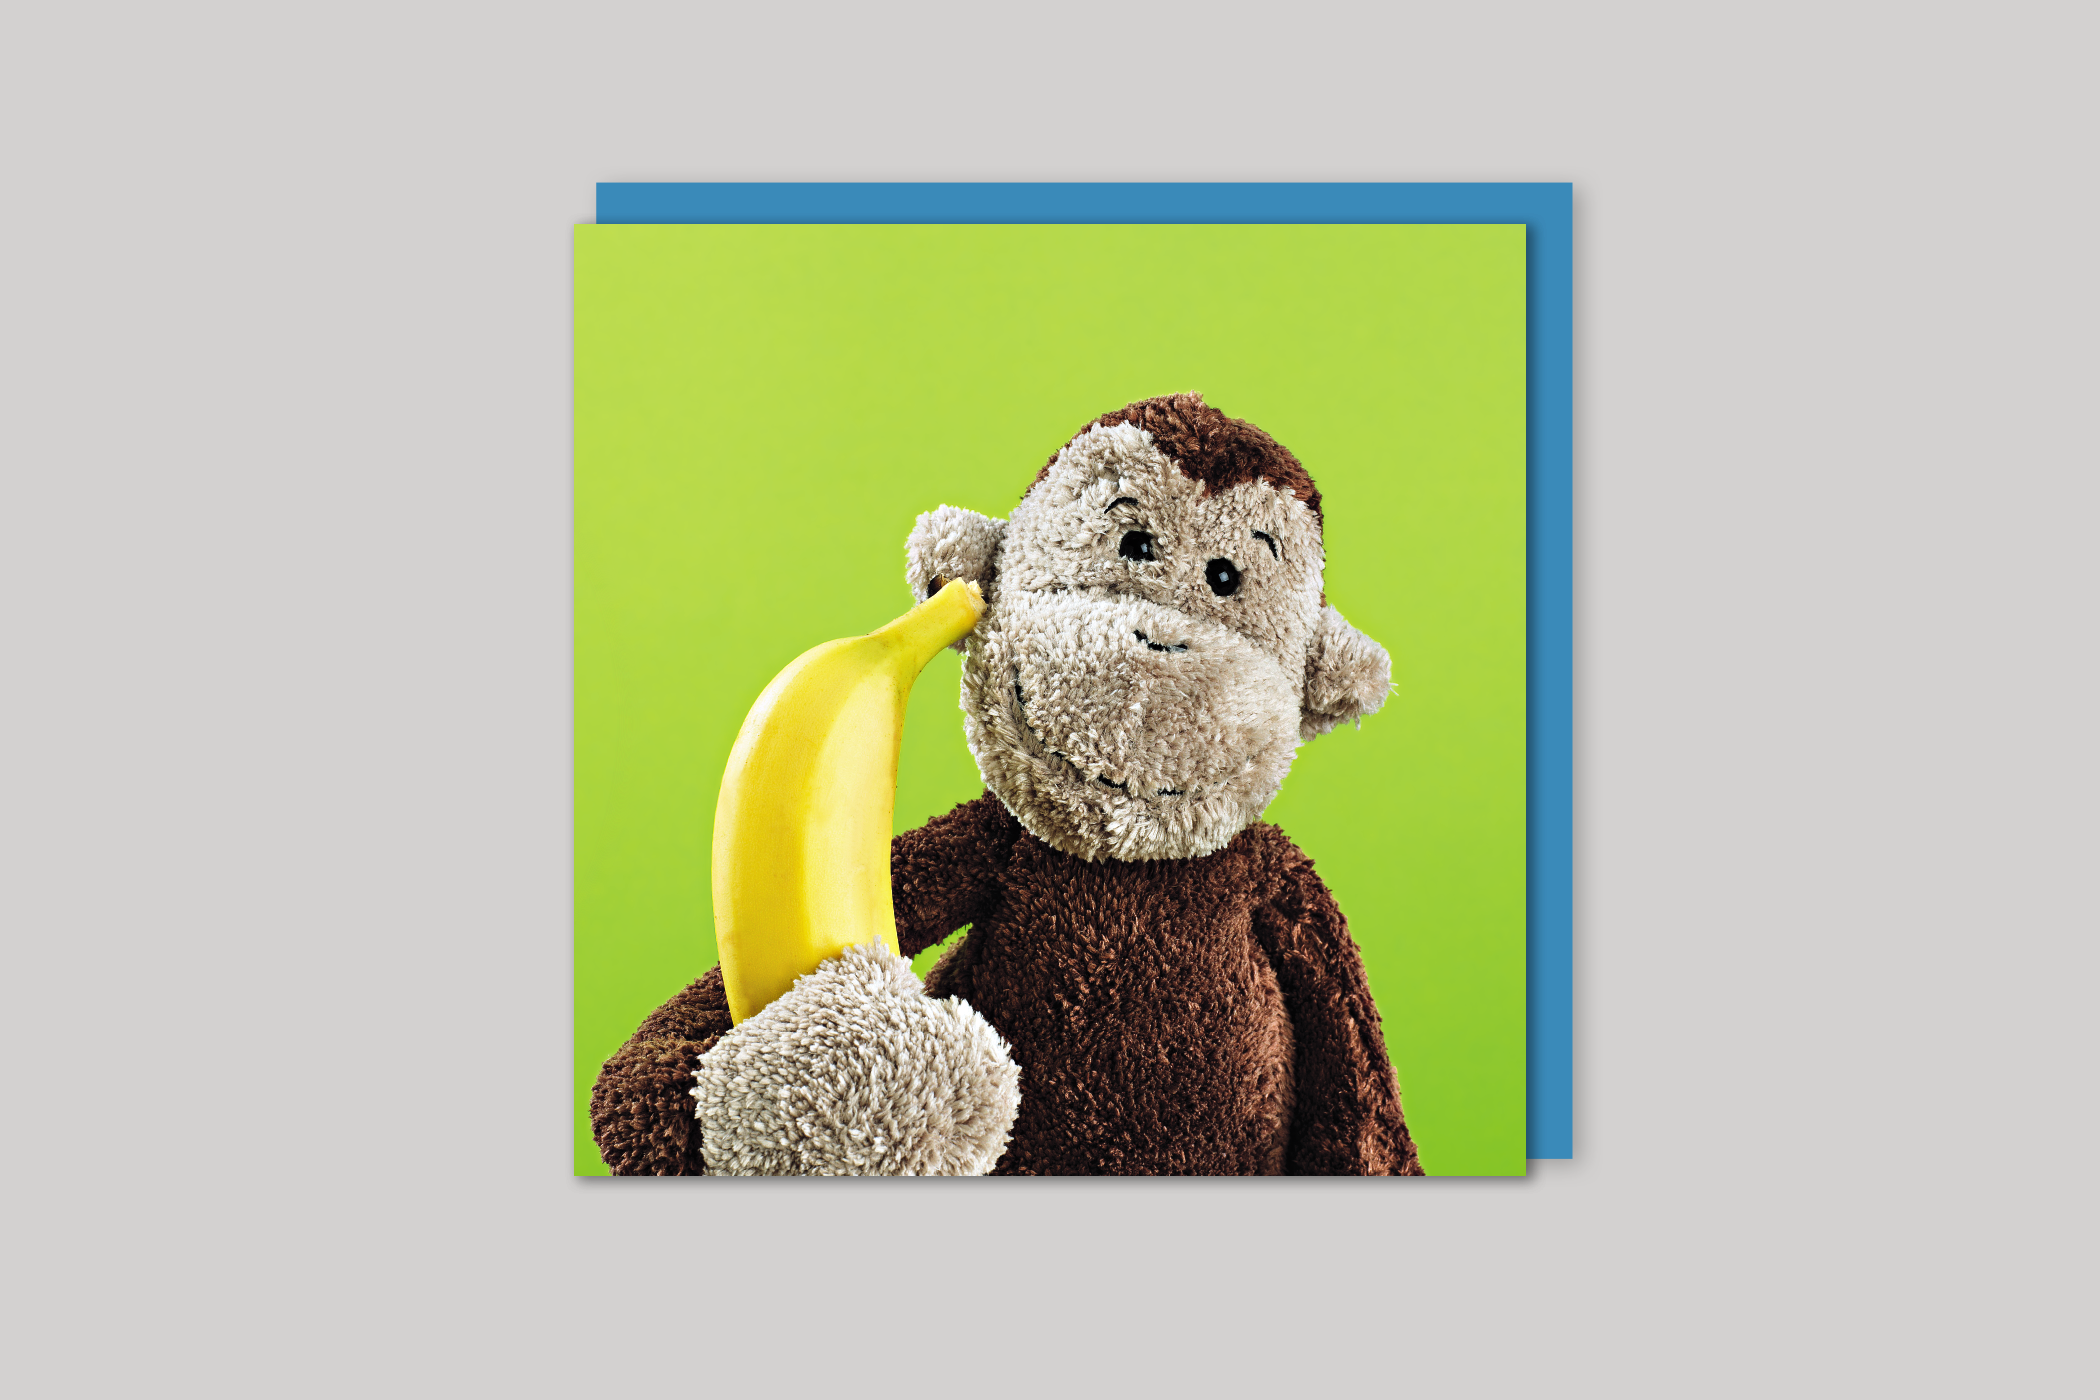 Cheeky Monkey from Exposure range of photographic cards by Icon, back page.